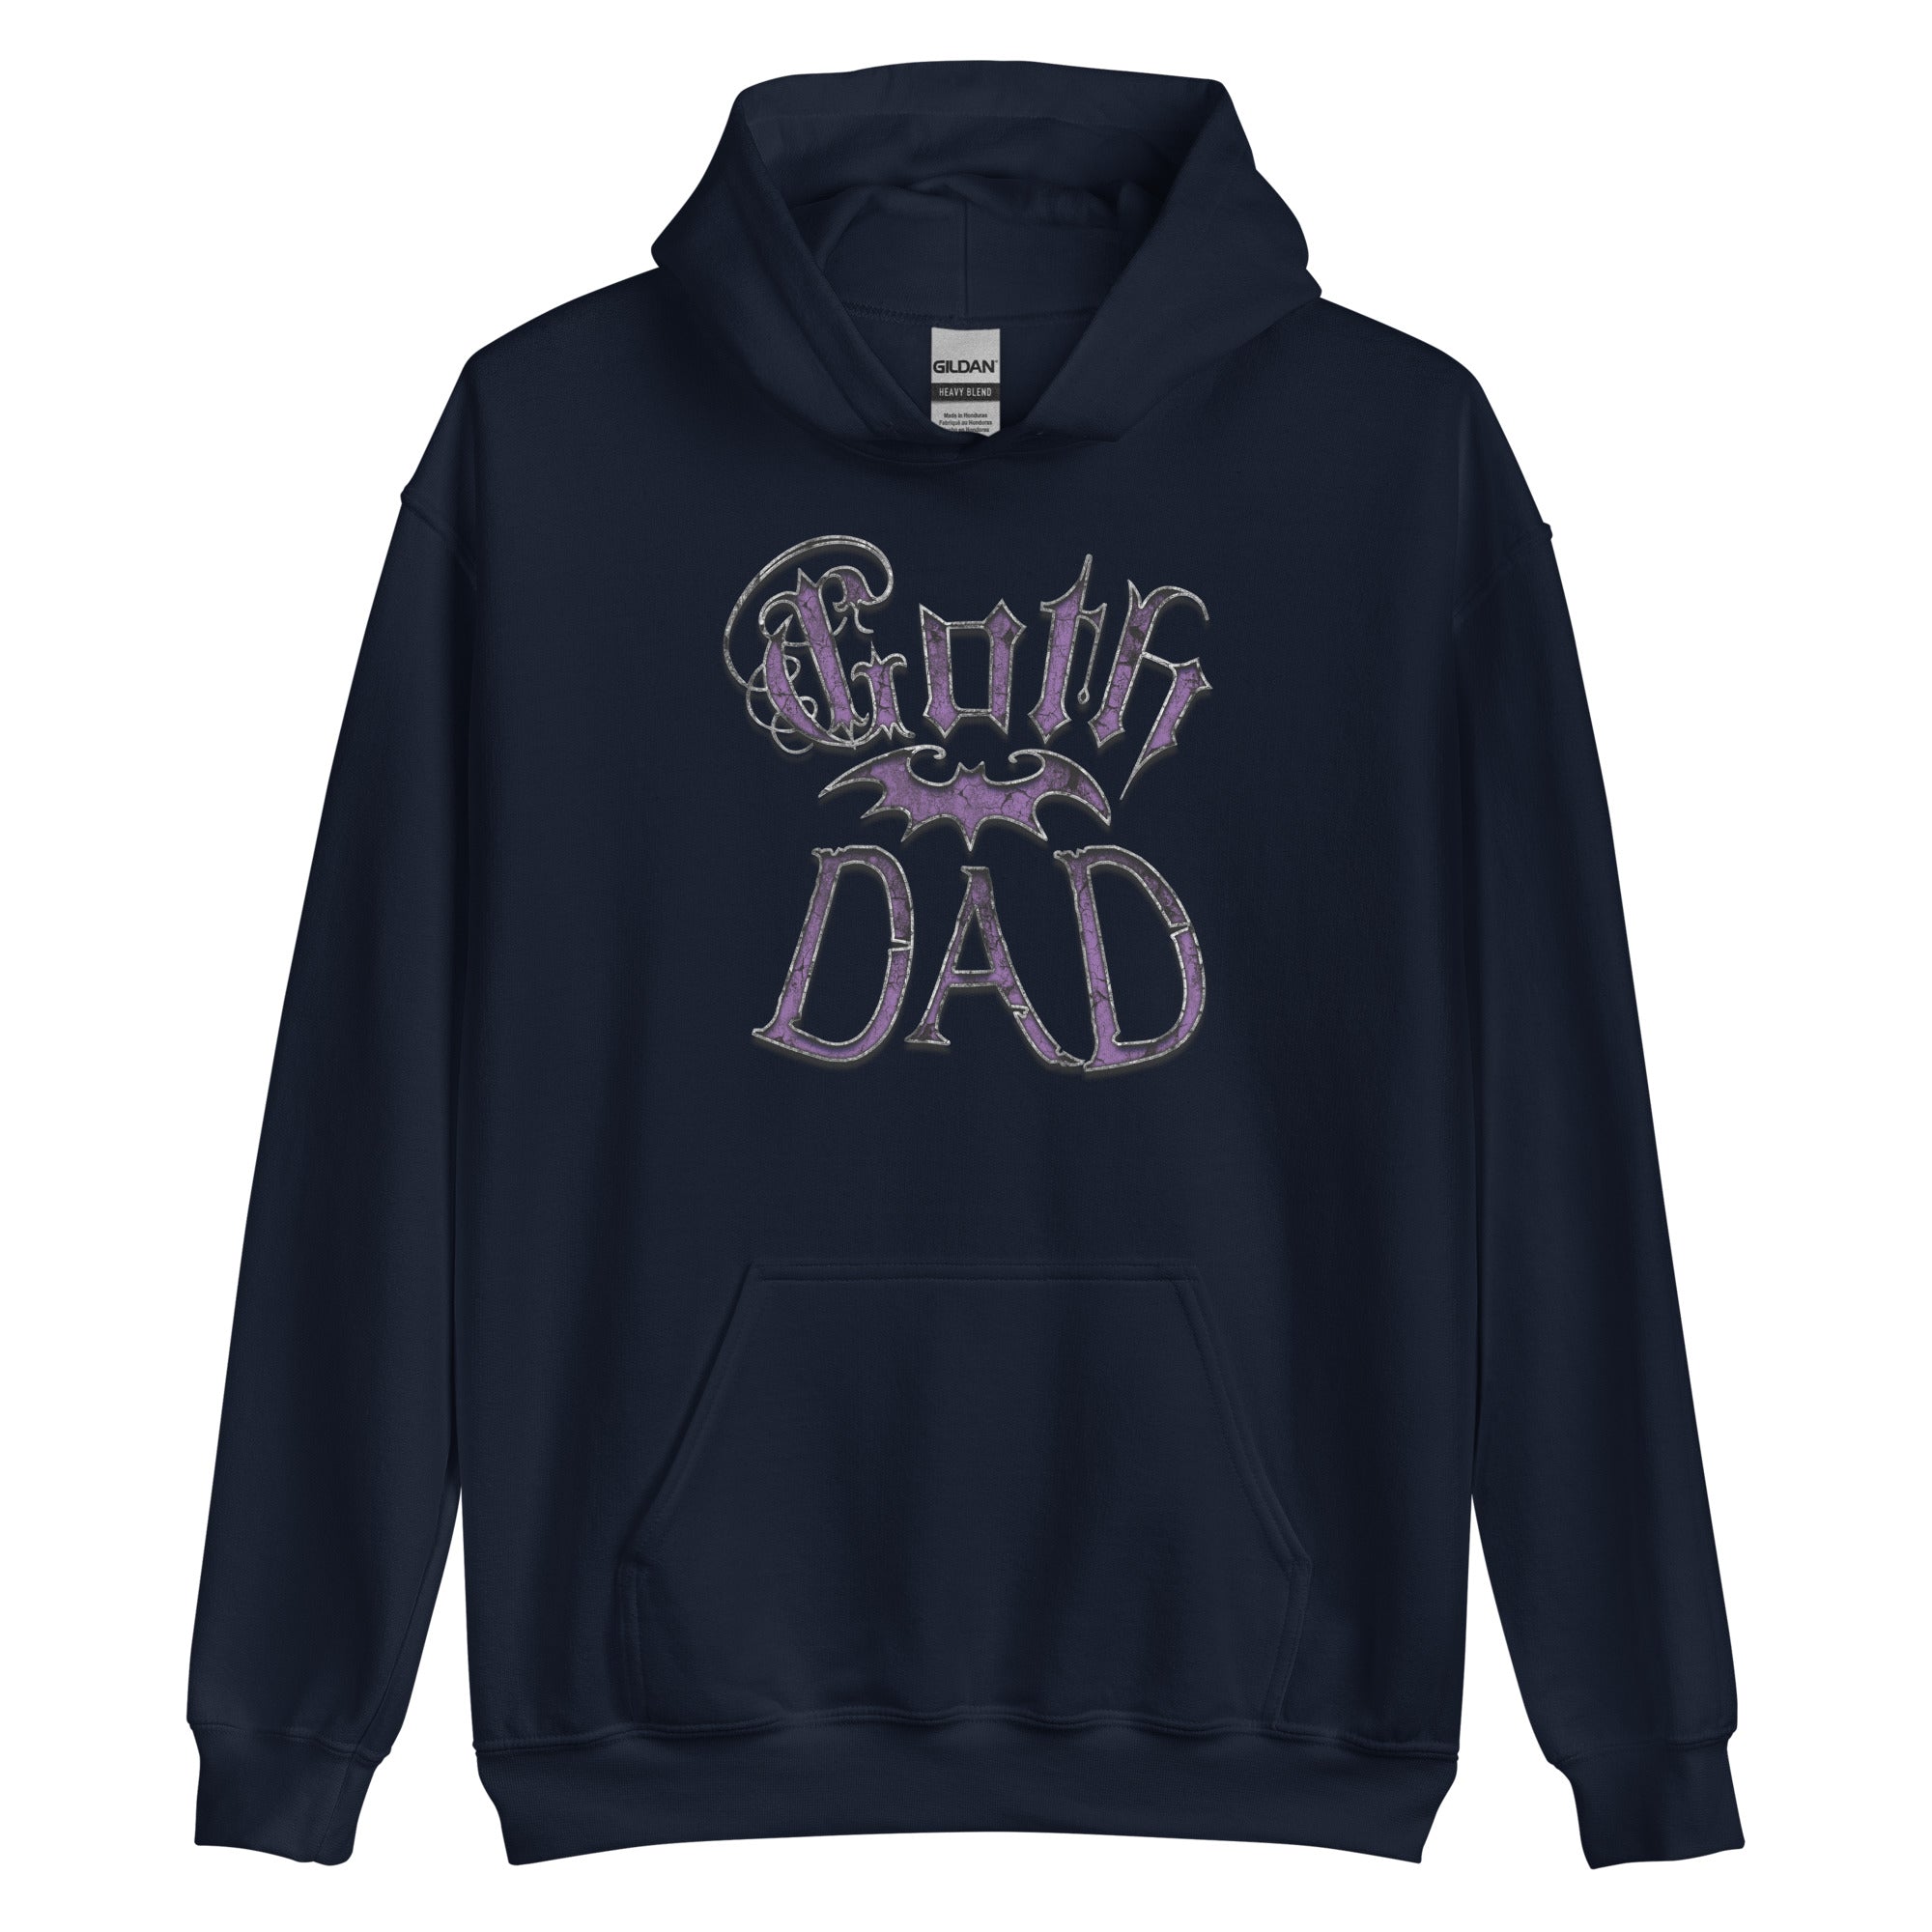 Purple Goth Dad with Bat Father's Day Gift Pullover Hoodie Sweatshirt